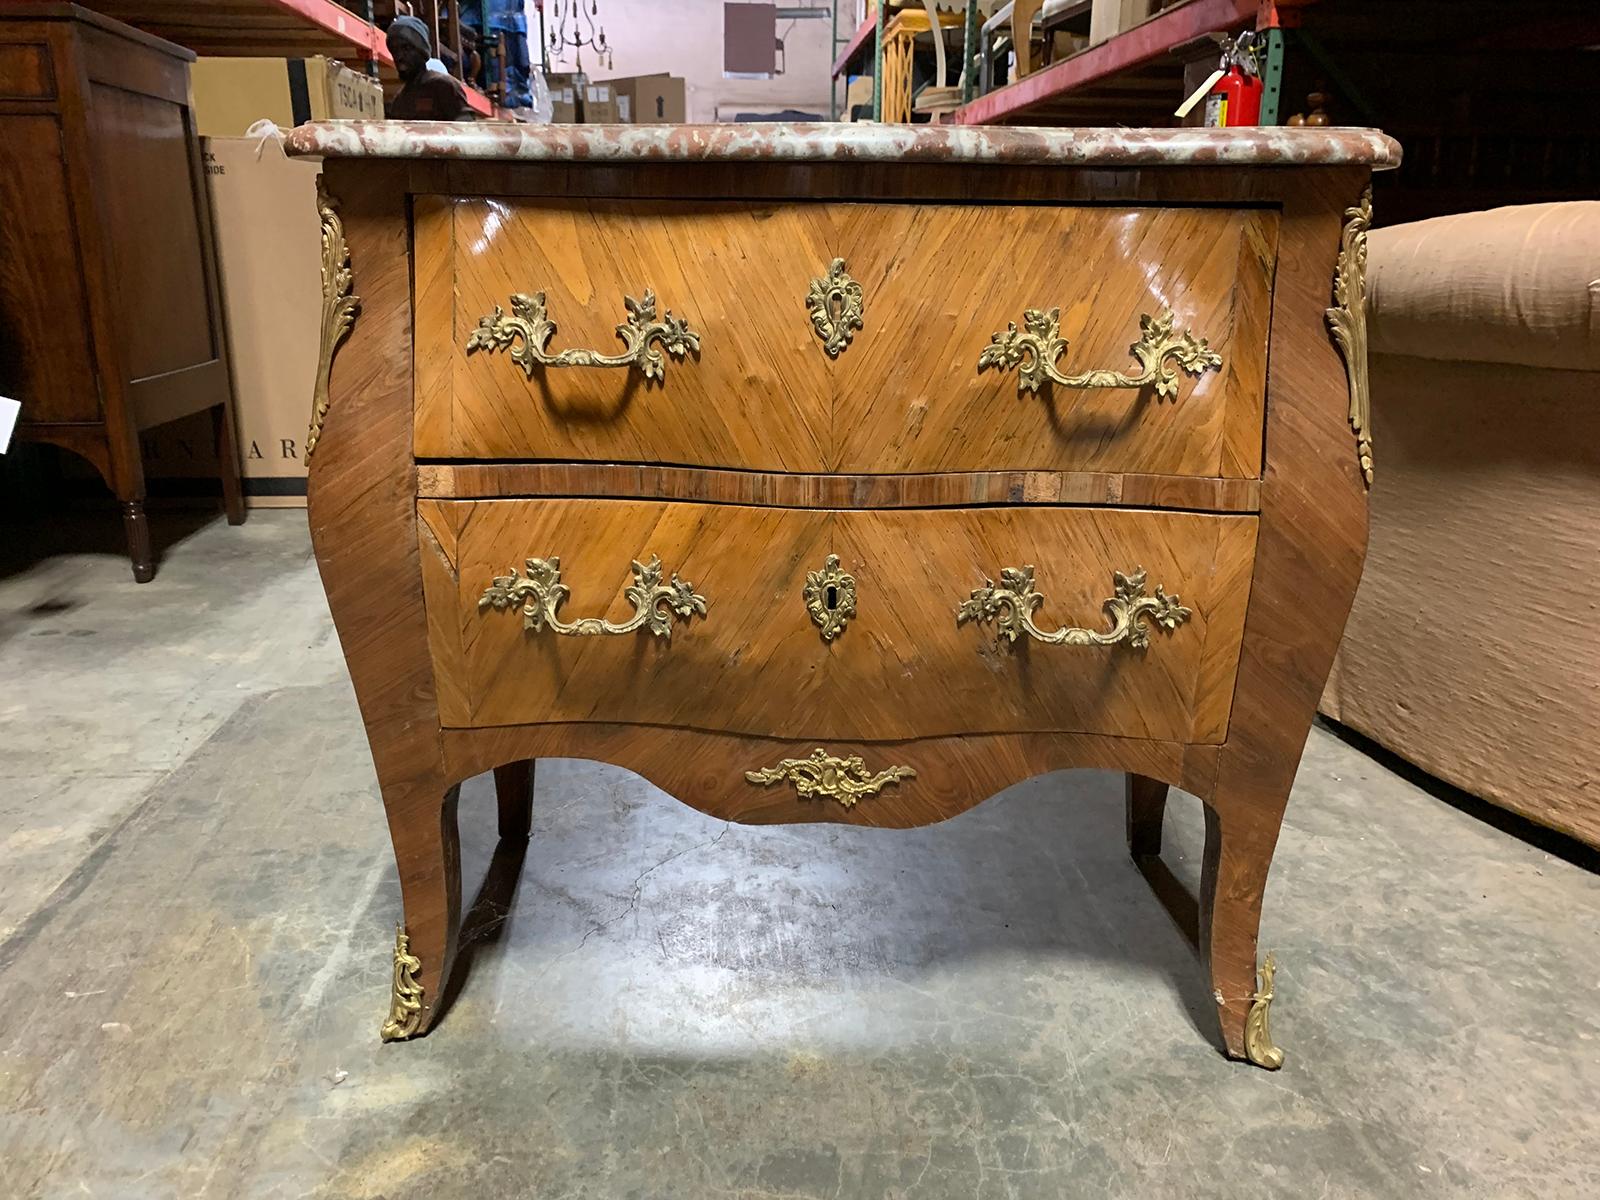 19th century French marble top commode with two drawers.